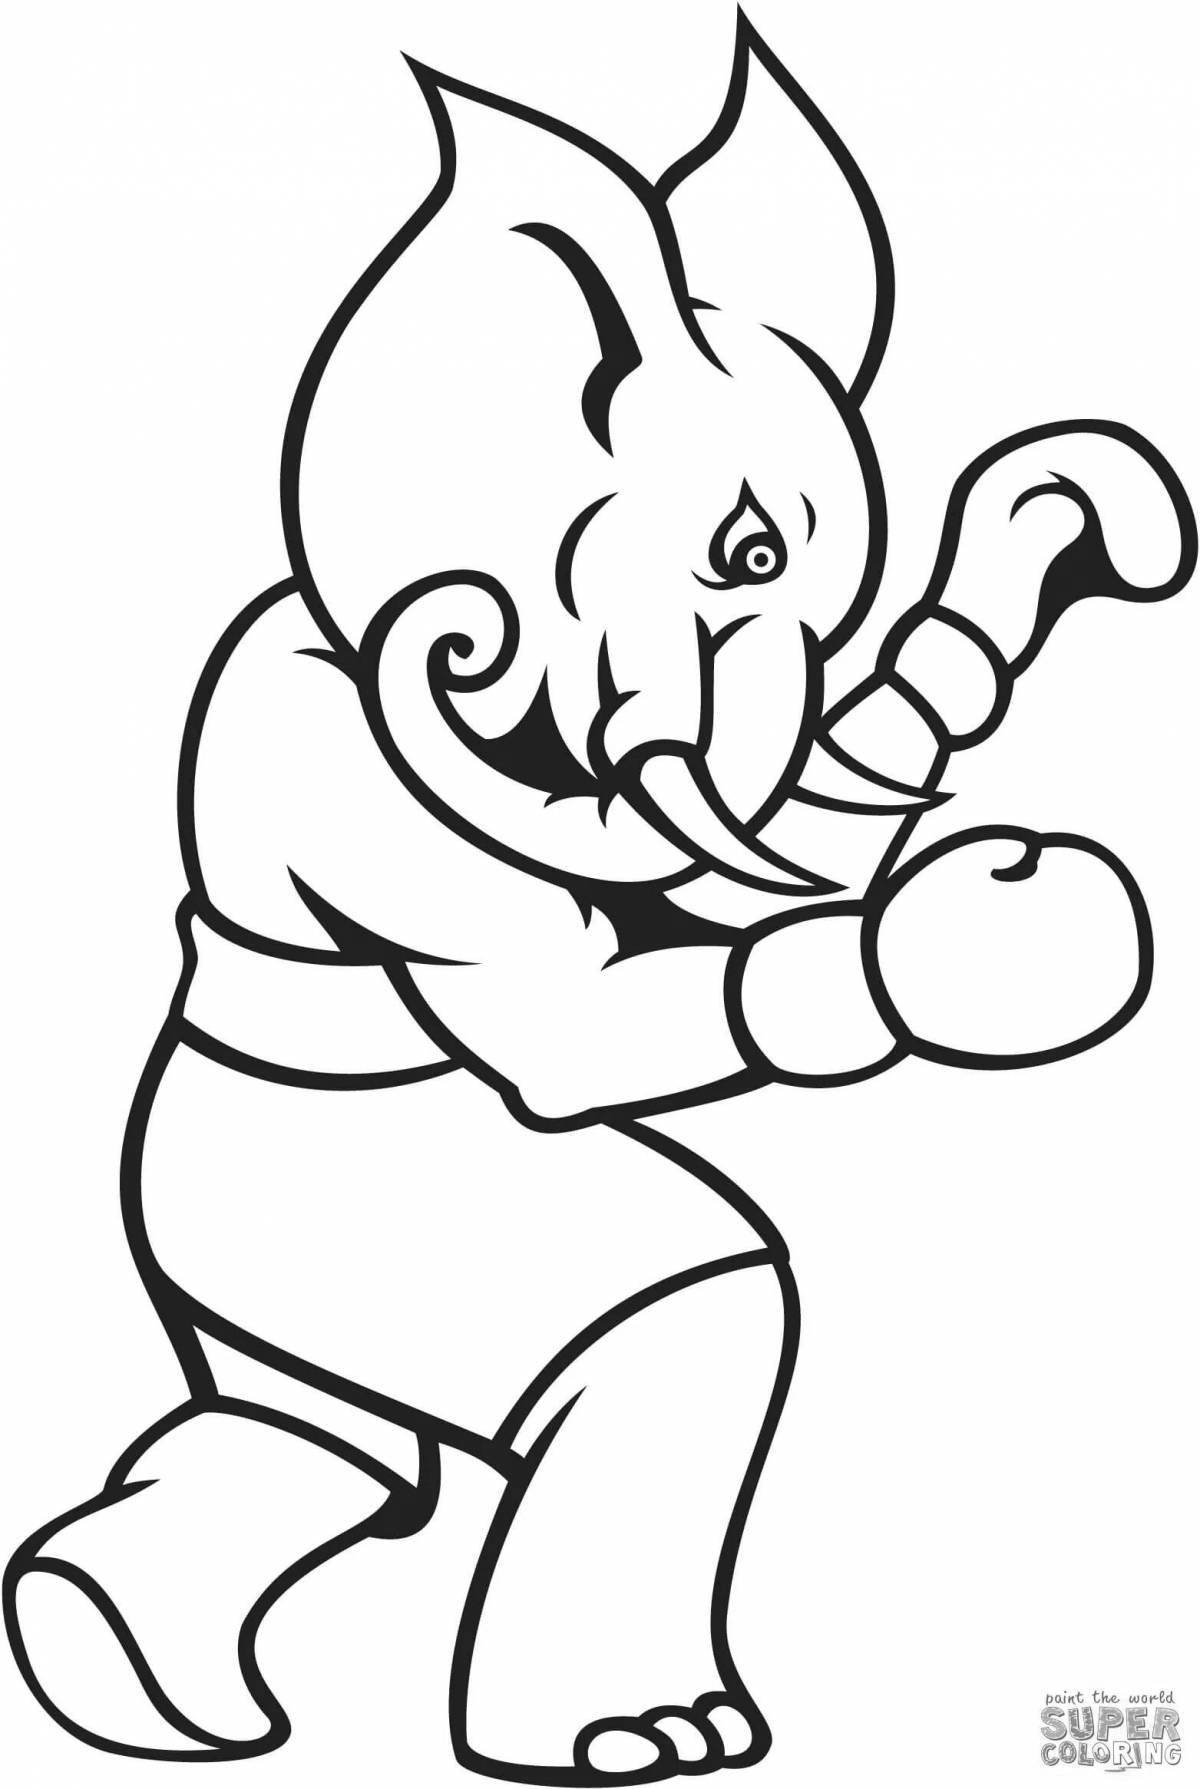 Fun boxing and boo coloring for kids